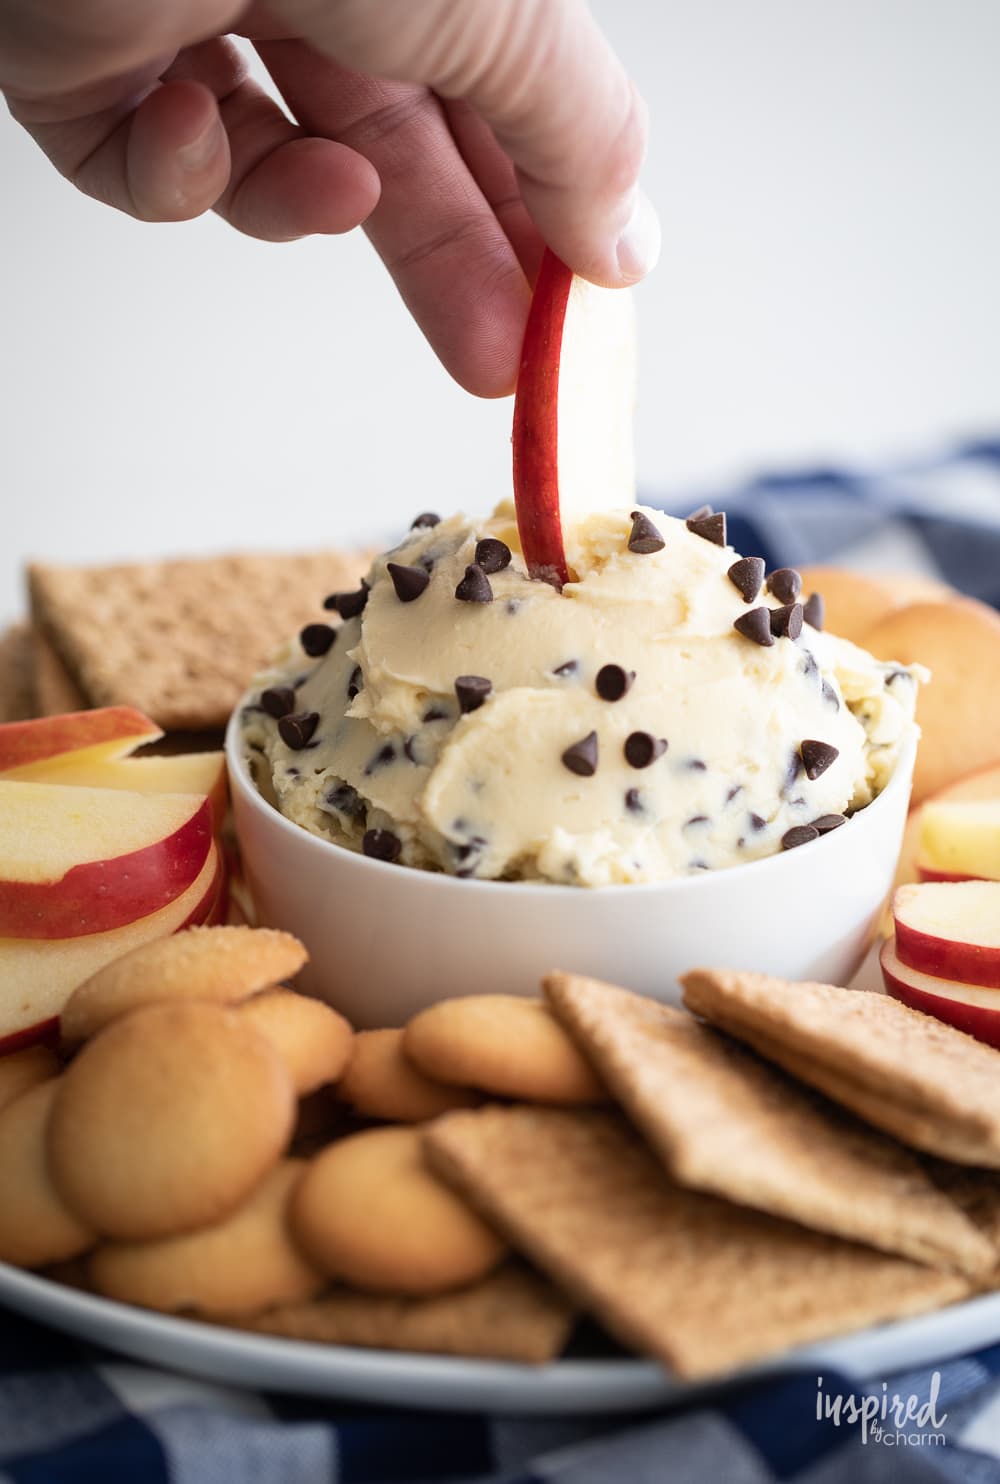 hand dipping apple slice into chocolate chip cheesecake dip.